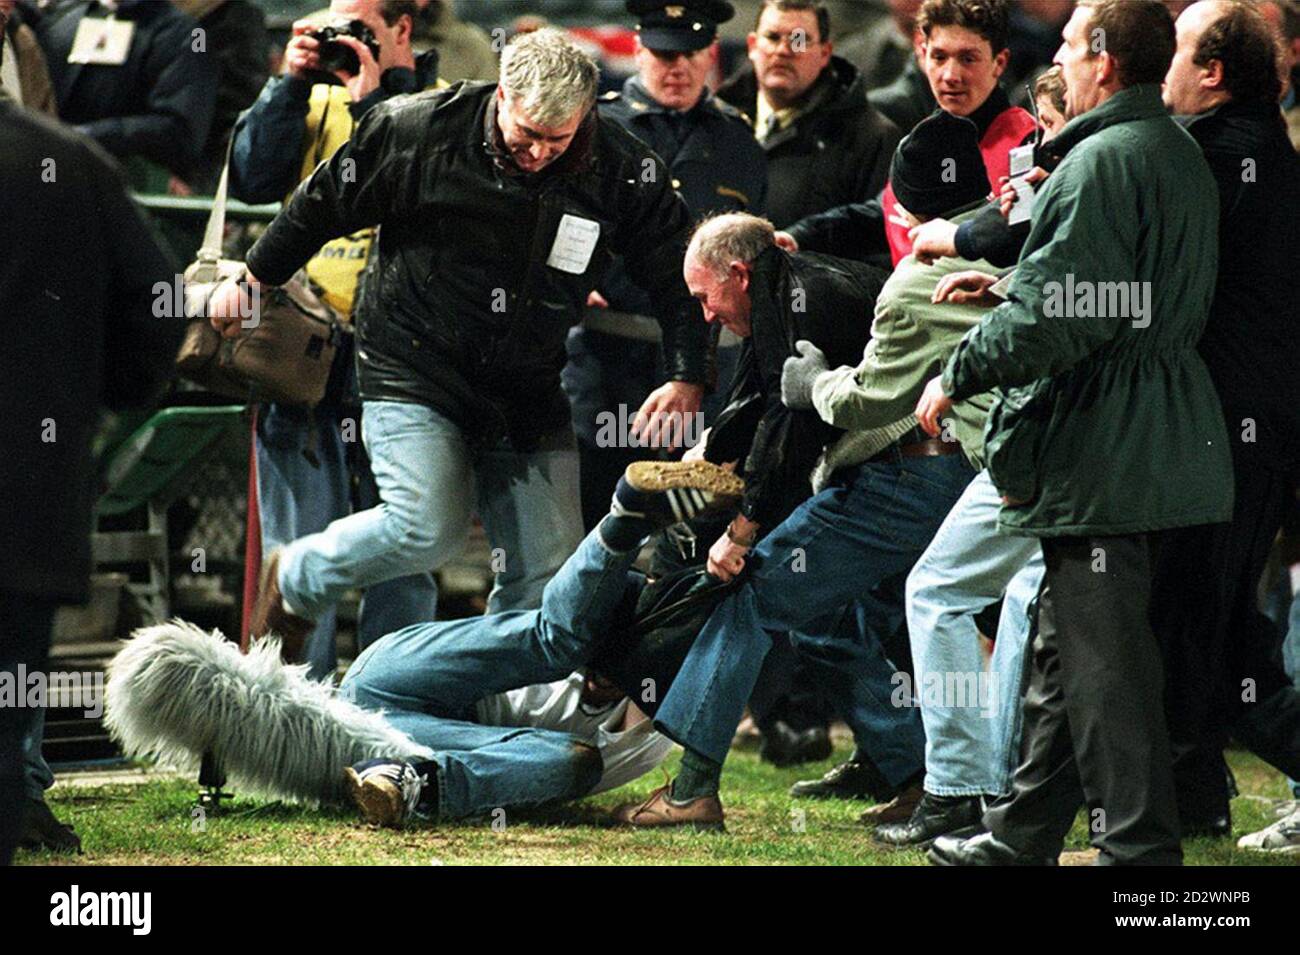 DUB 4: DUBLIN: 16.02.95: Rival fans attack each other during last night's (Wednesday) Republic of Ireland v England match at Landsdowne Road in Dublin. See PA Story IRISH soccer. PA NEWS, Martin McCullough. Stock Photo